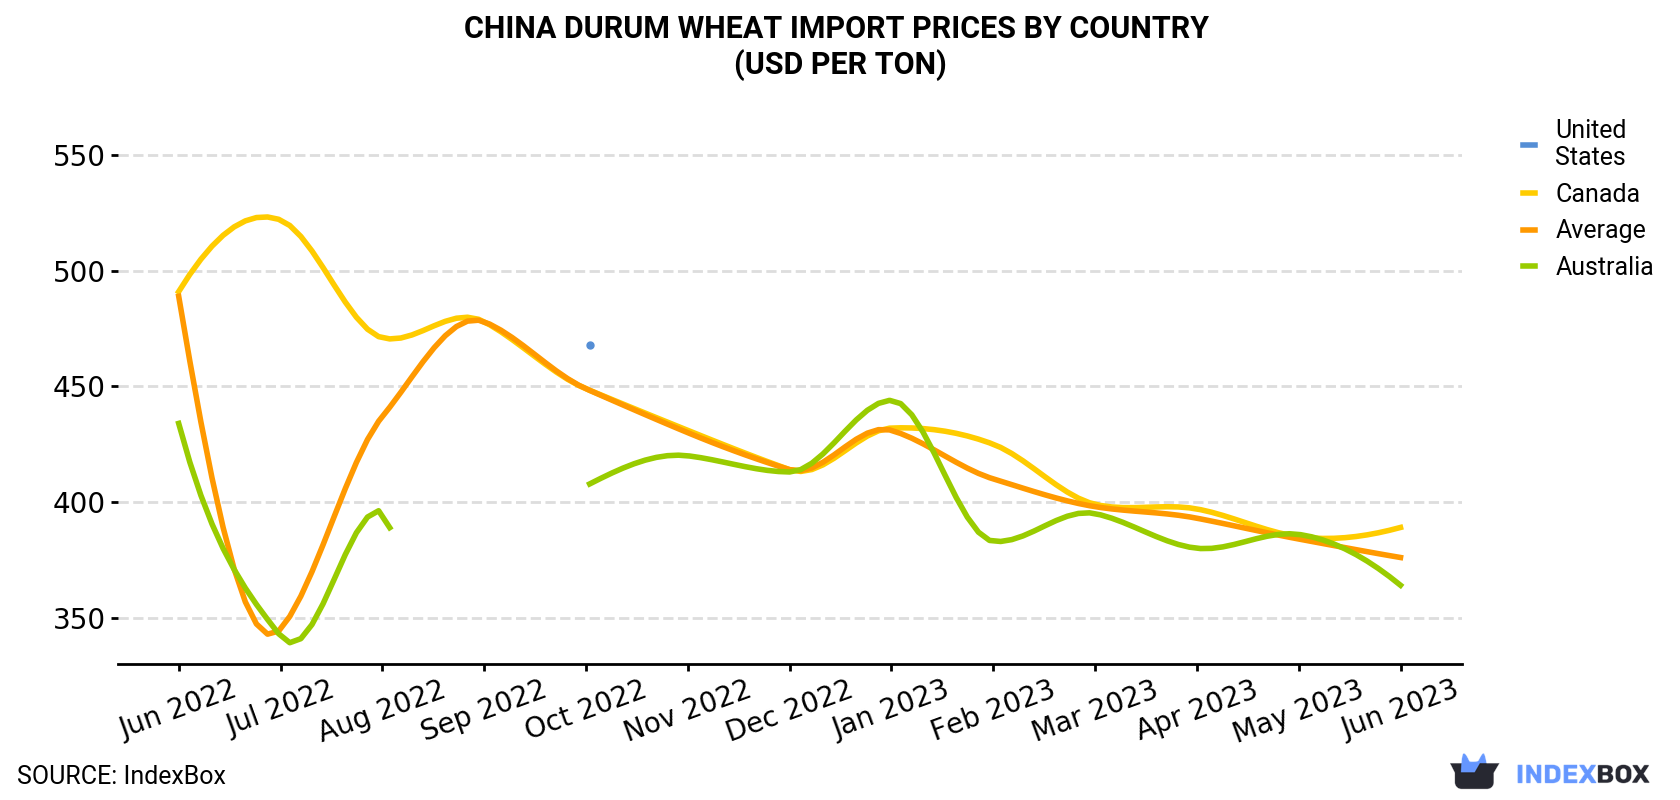 China Durum Wheat Import Prices By Country (USD Per Ton)